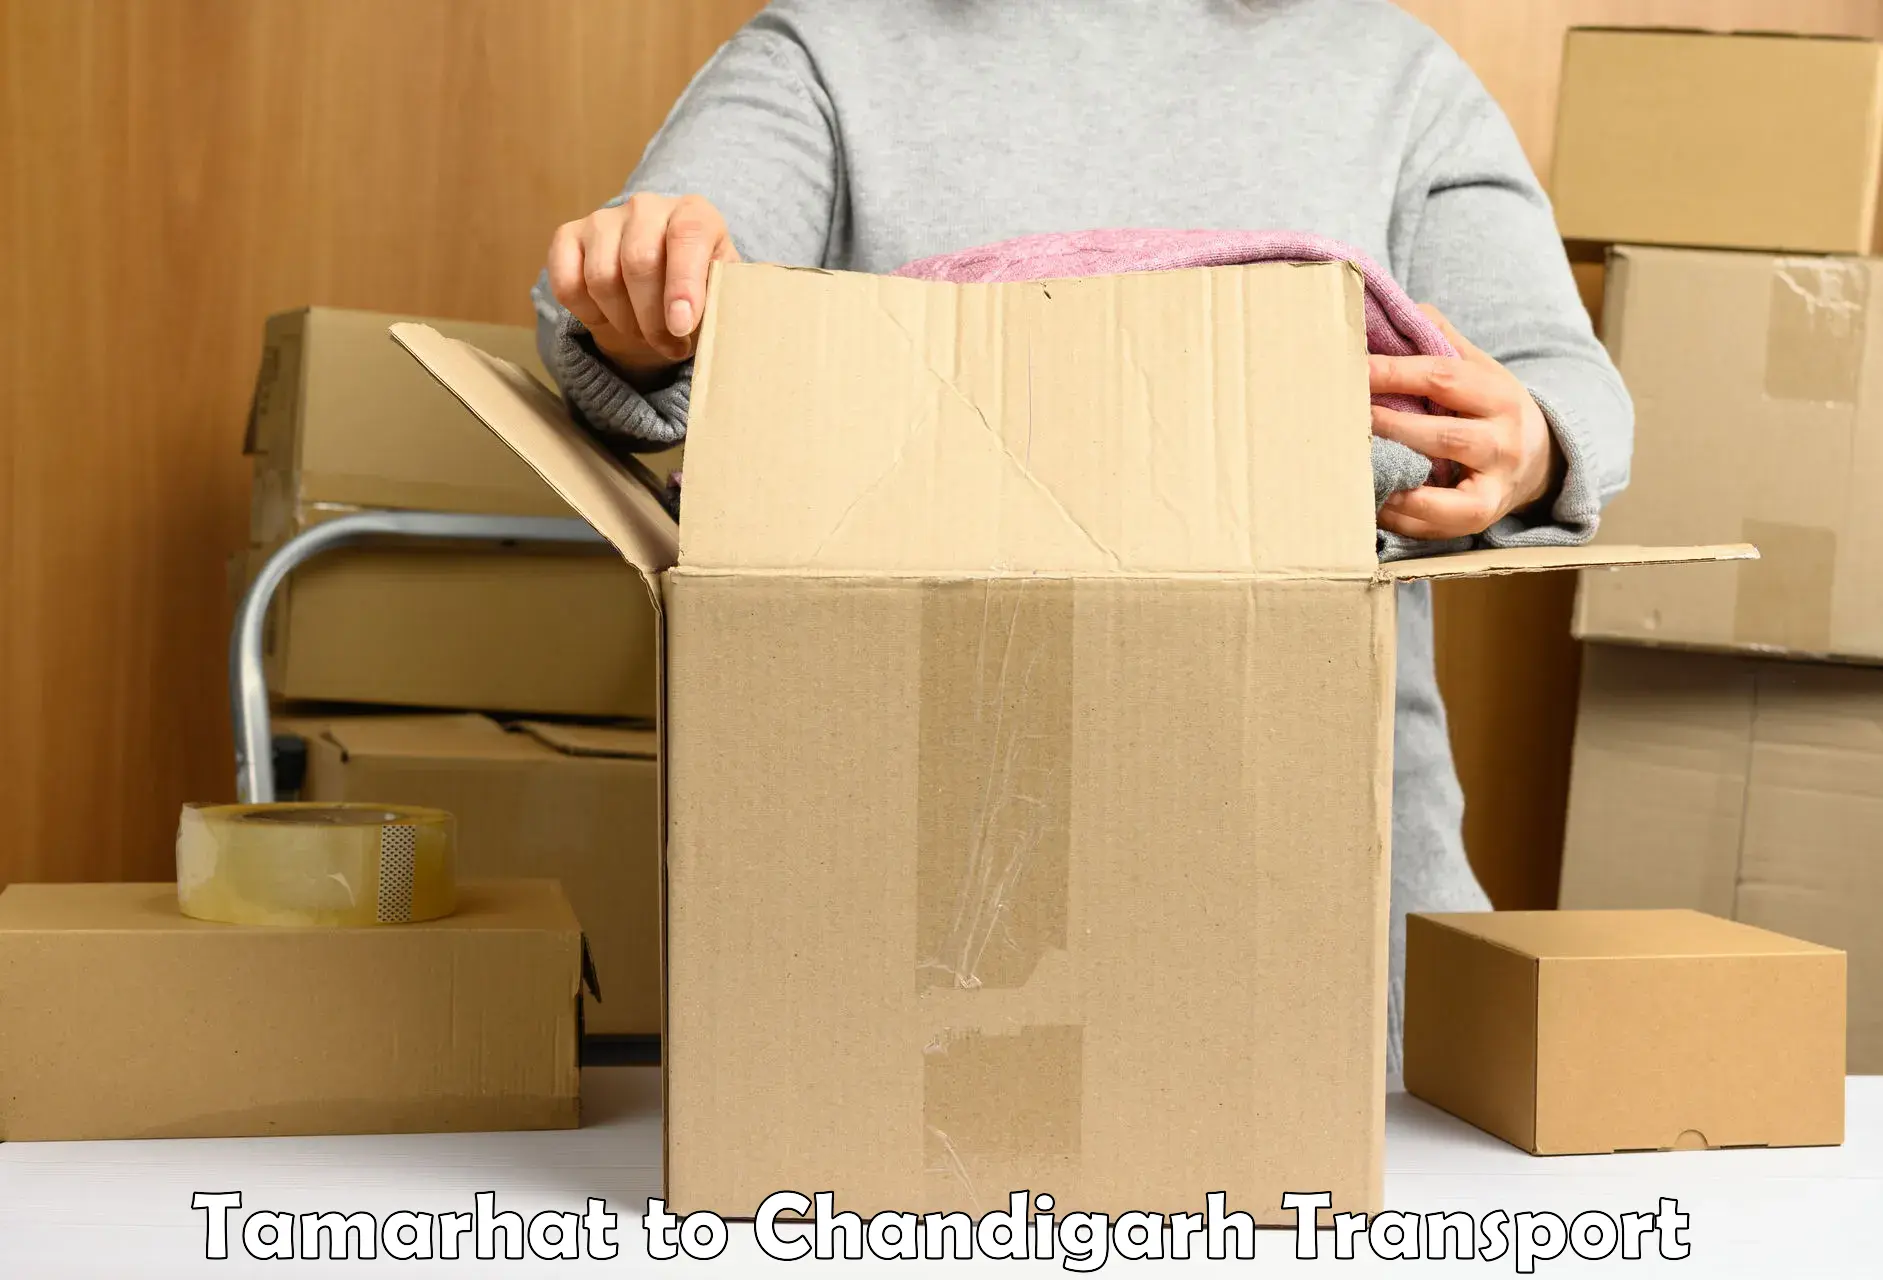 Commercial transport service Tamarhat to Chandigarh